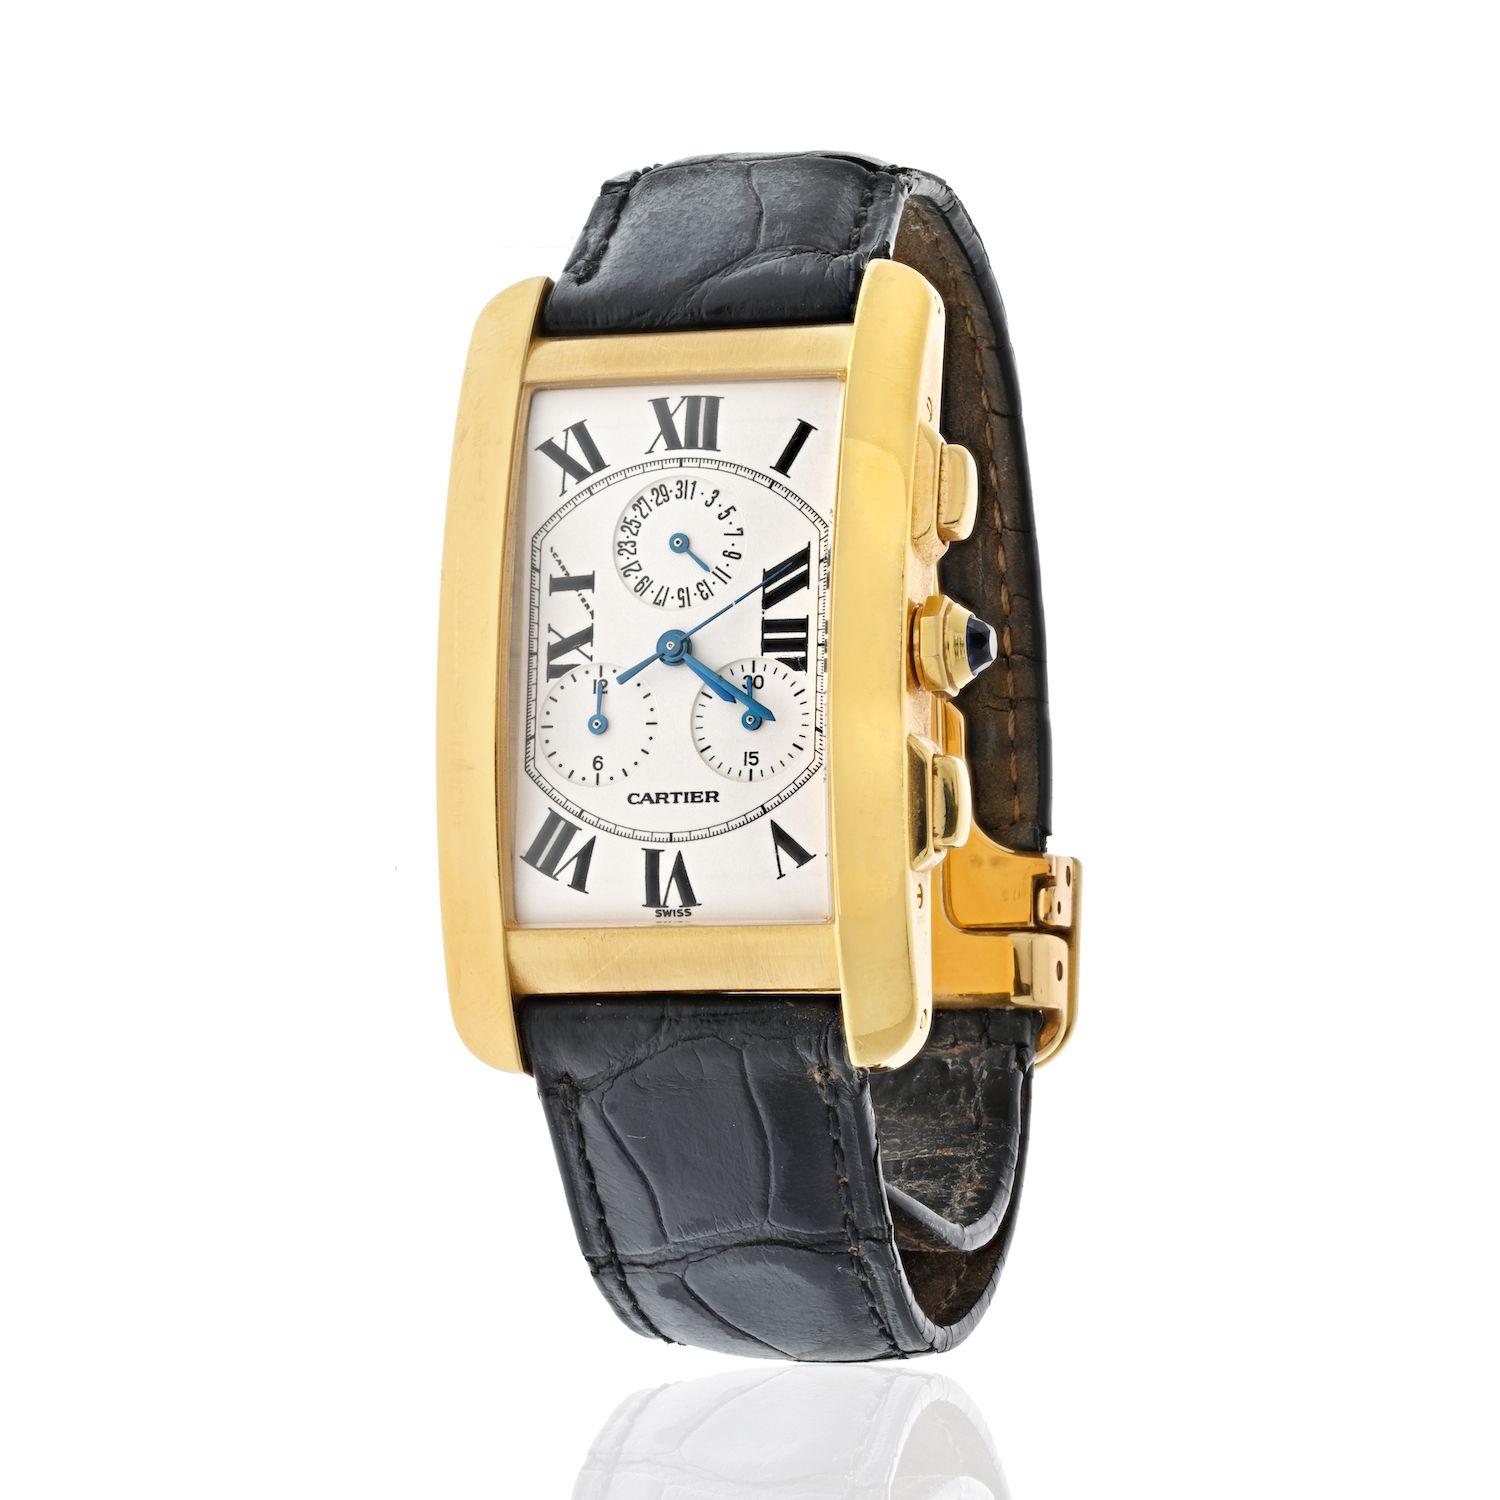 The Cartier Tank Americaine 18K Yellow Gold 1730 Watch 1730 Watch makes a great purchase for those who appreciate classic and timeless style. This watch features a classic rectangular 18K yellow gold case with a striking dial and a mechanical